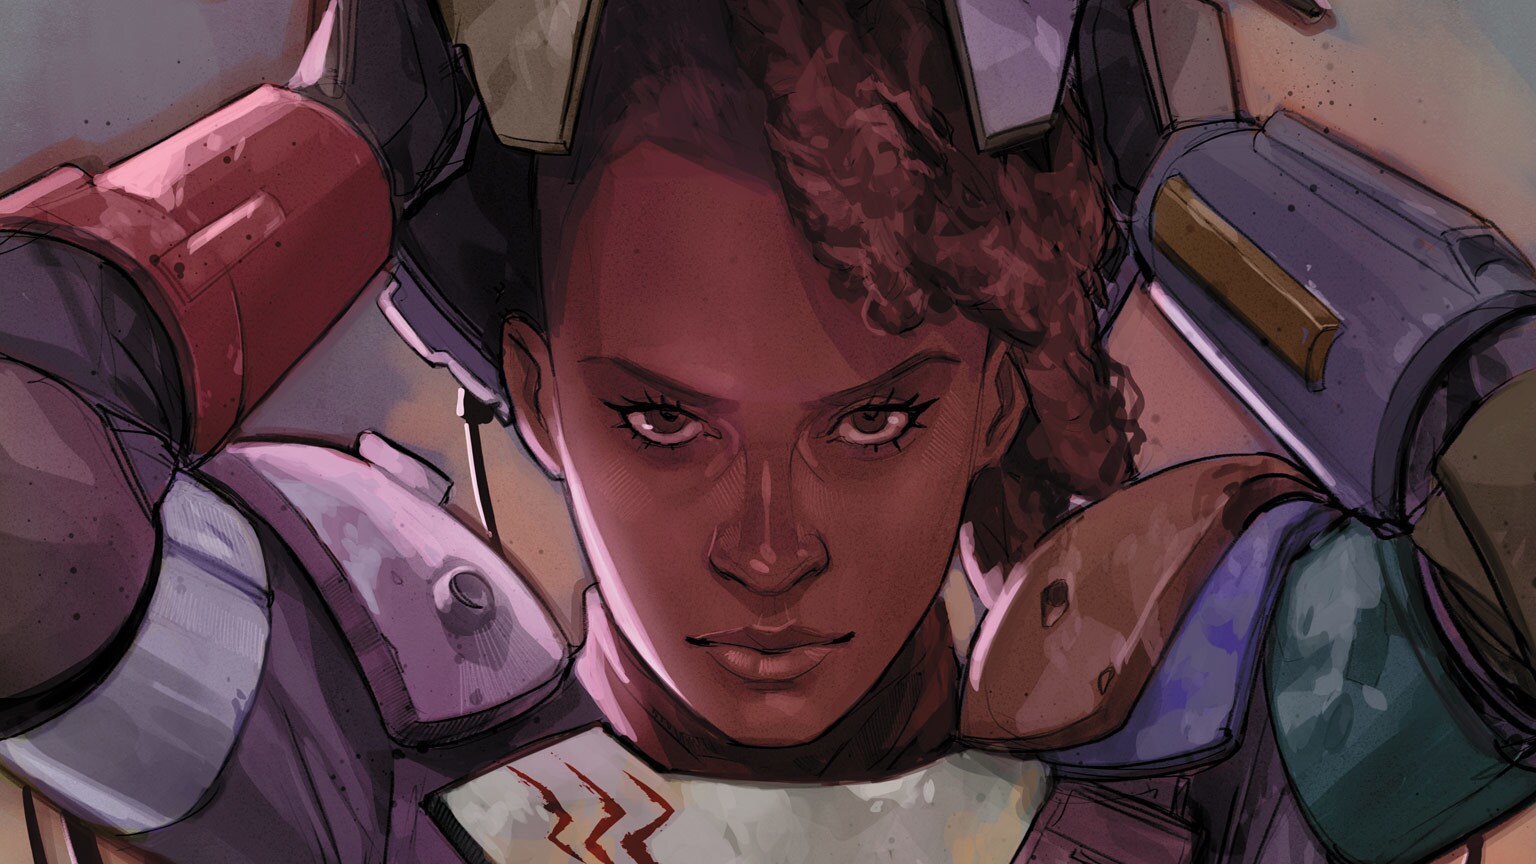 Keeve Treenis Joins the Storm in Marvel's Star Wars: The High Republic #9 - Exclusive Preview